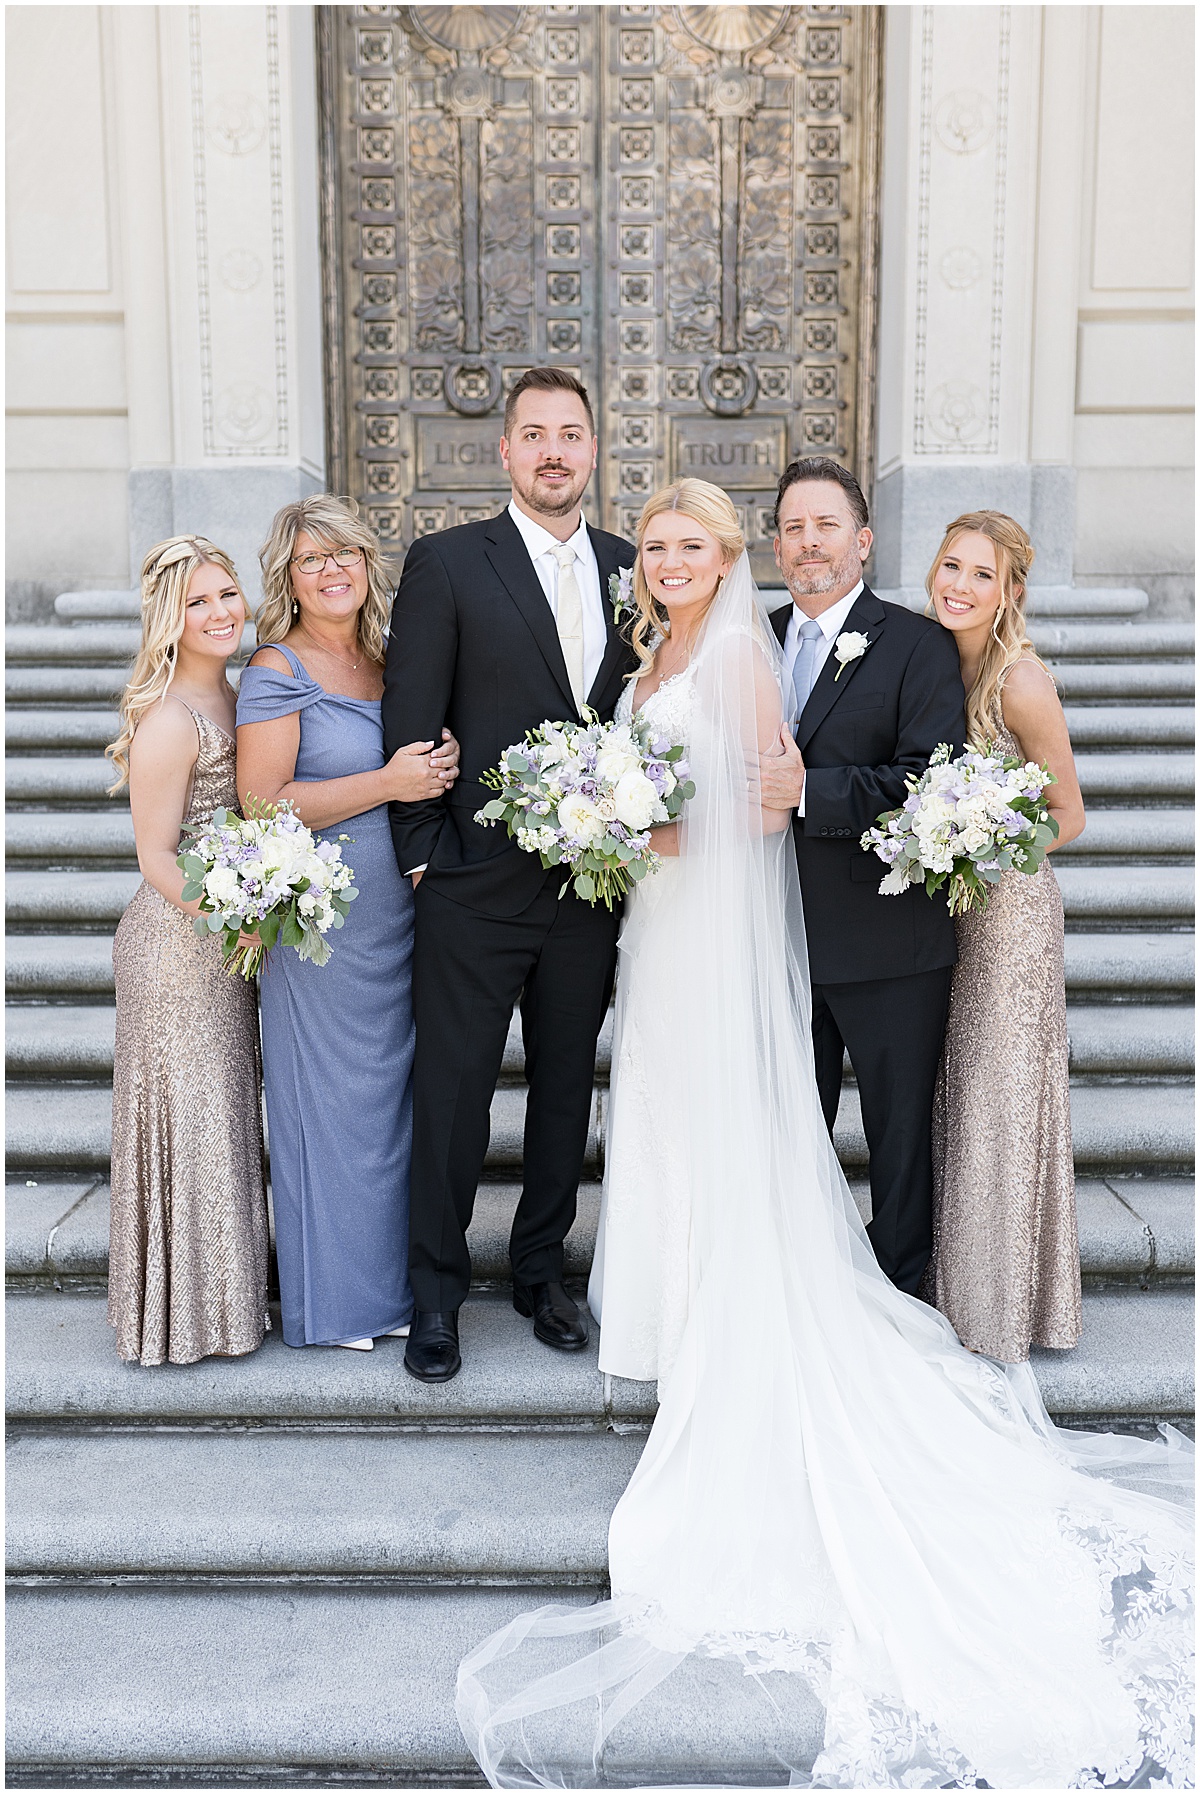 Family wedding photo at The Indiana World War Memorial in downtown Indianapolis